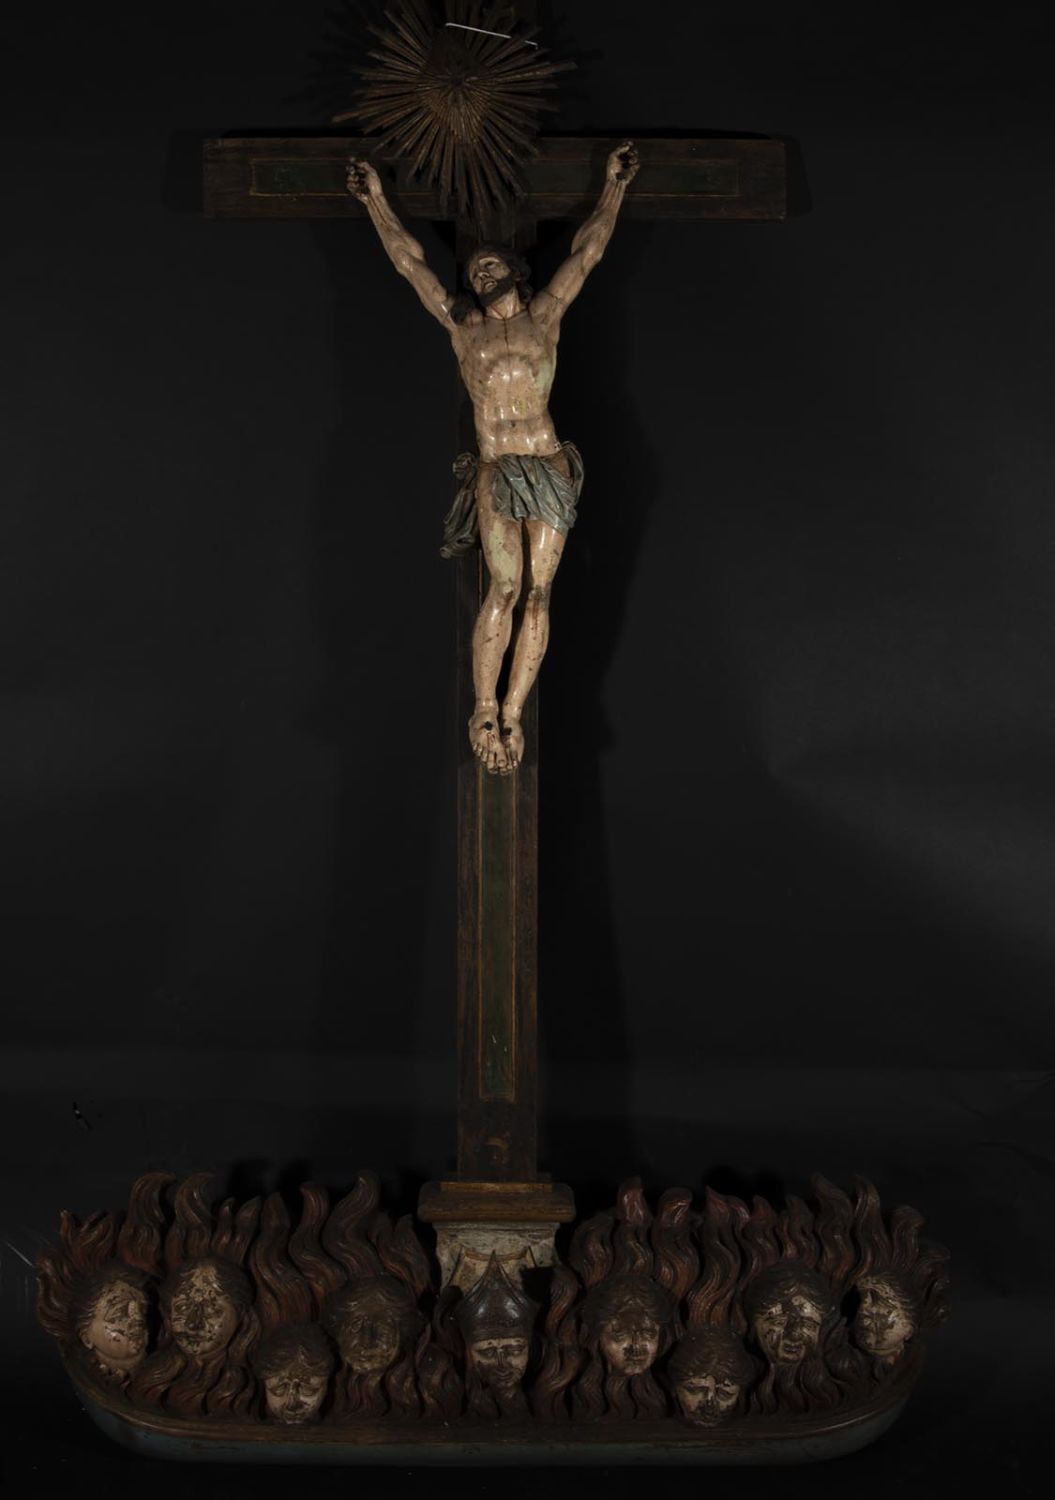 Magnificent Massive Christ on Calvary colonial Goa 17th century, Portuguese colonial work from South